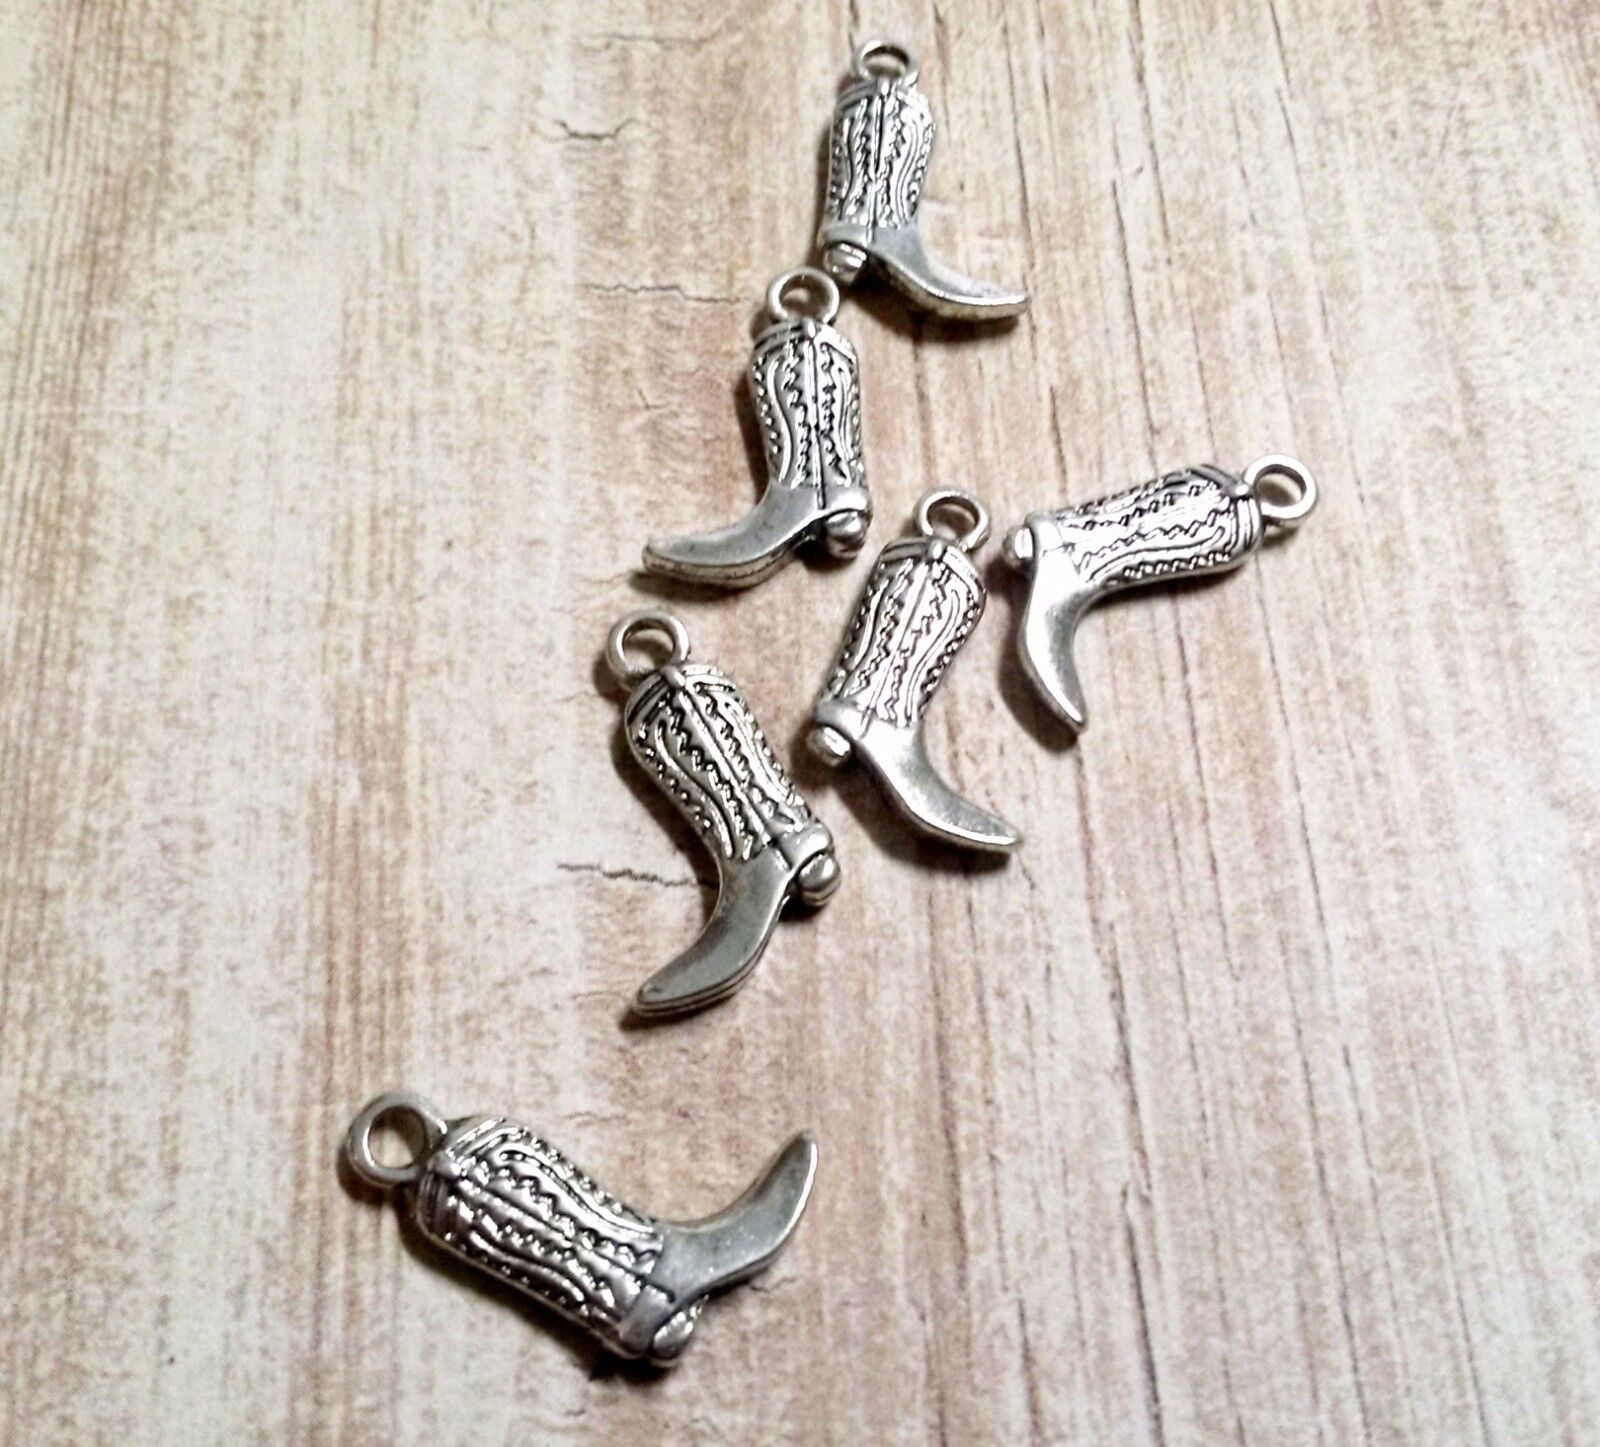 10 Cowboy Boot Charms Antique Silver Tone Western Pendants Cowgirl Findings